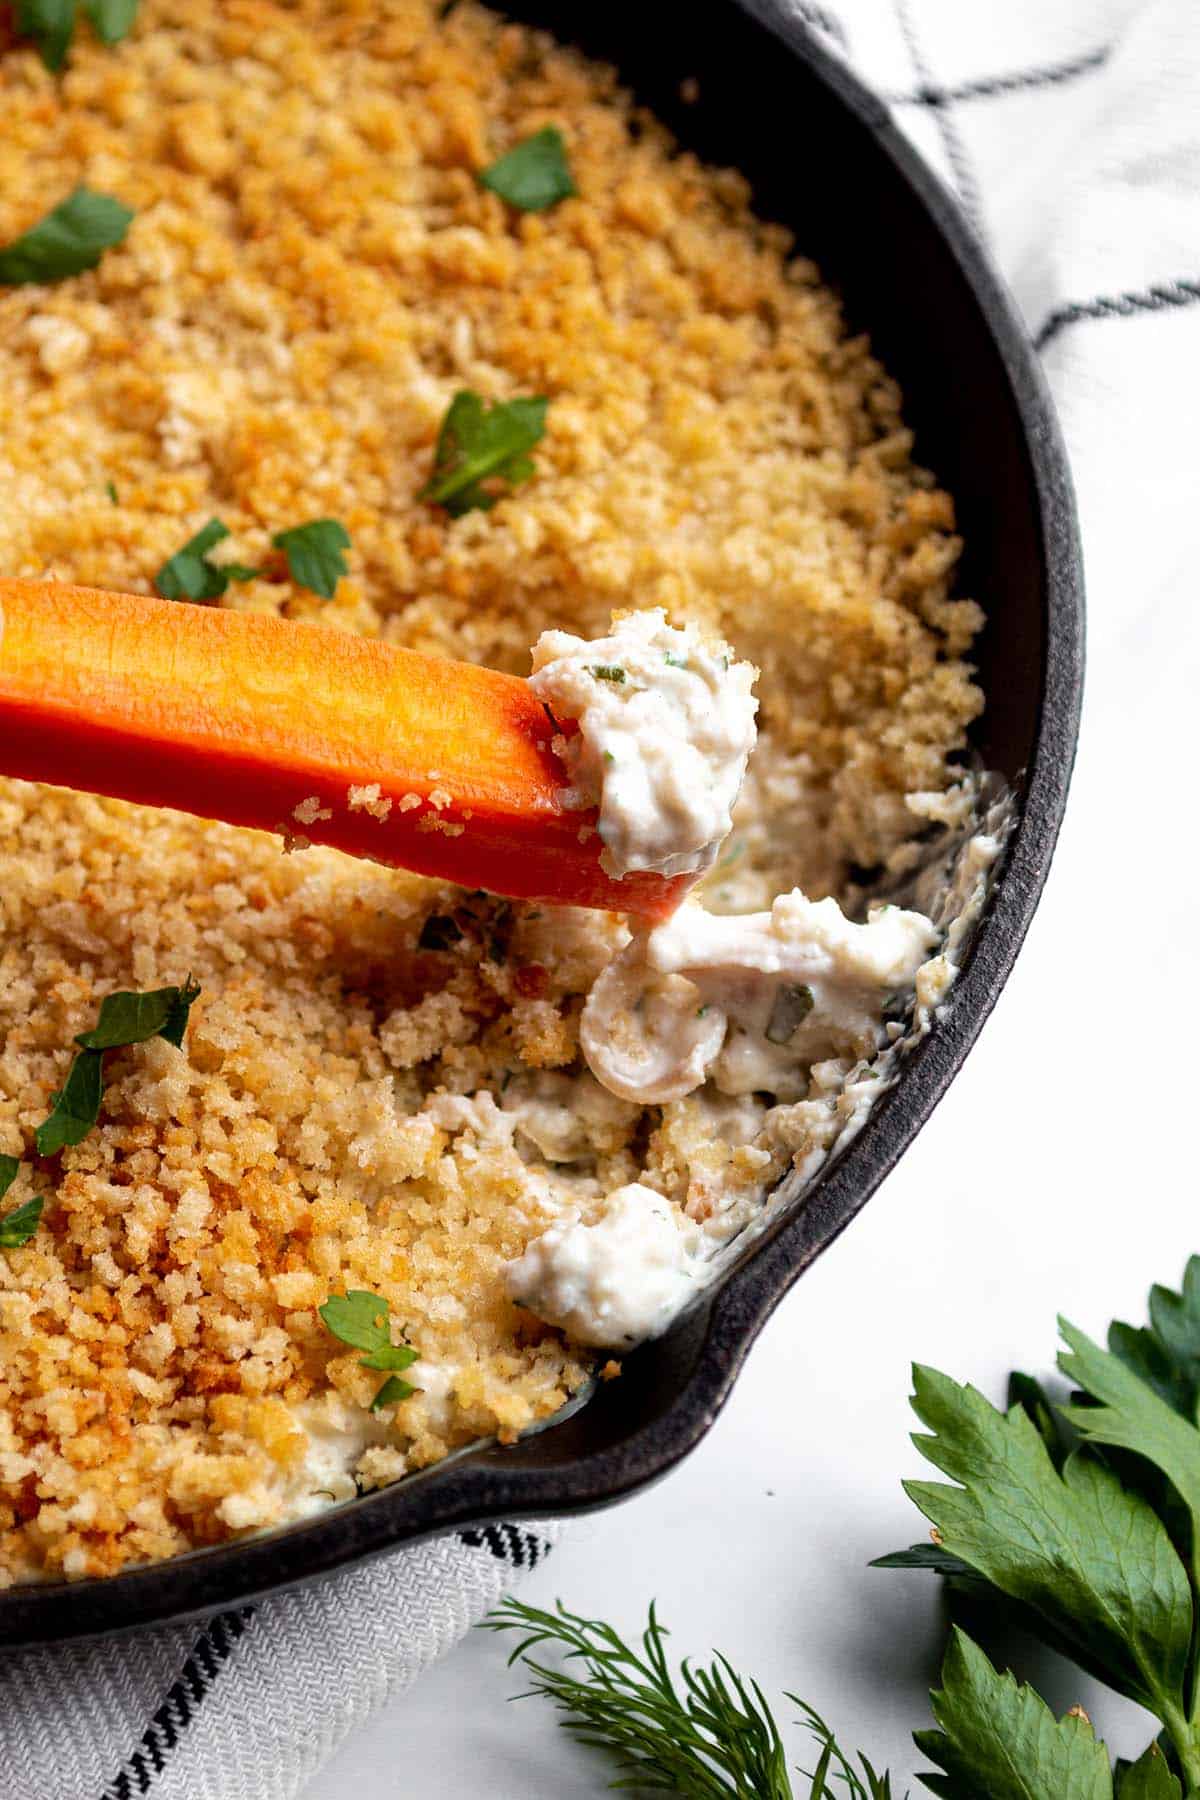 A carrot scooping out some clam dip from a small pan.